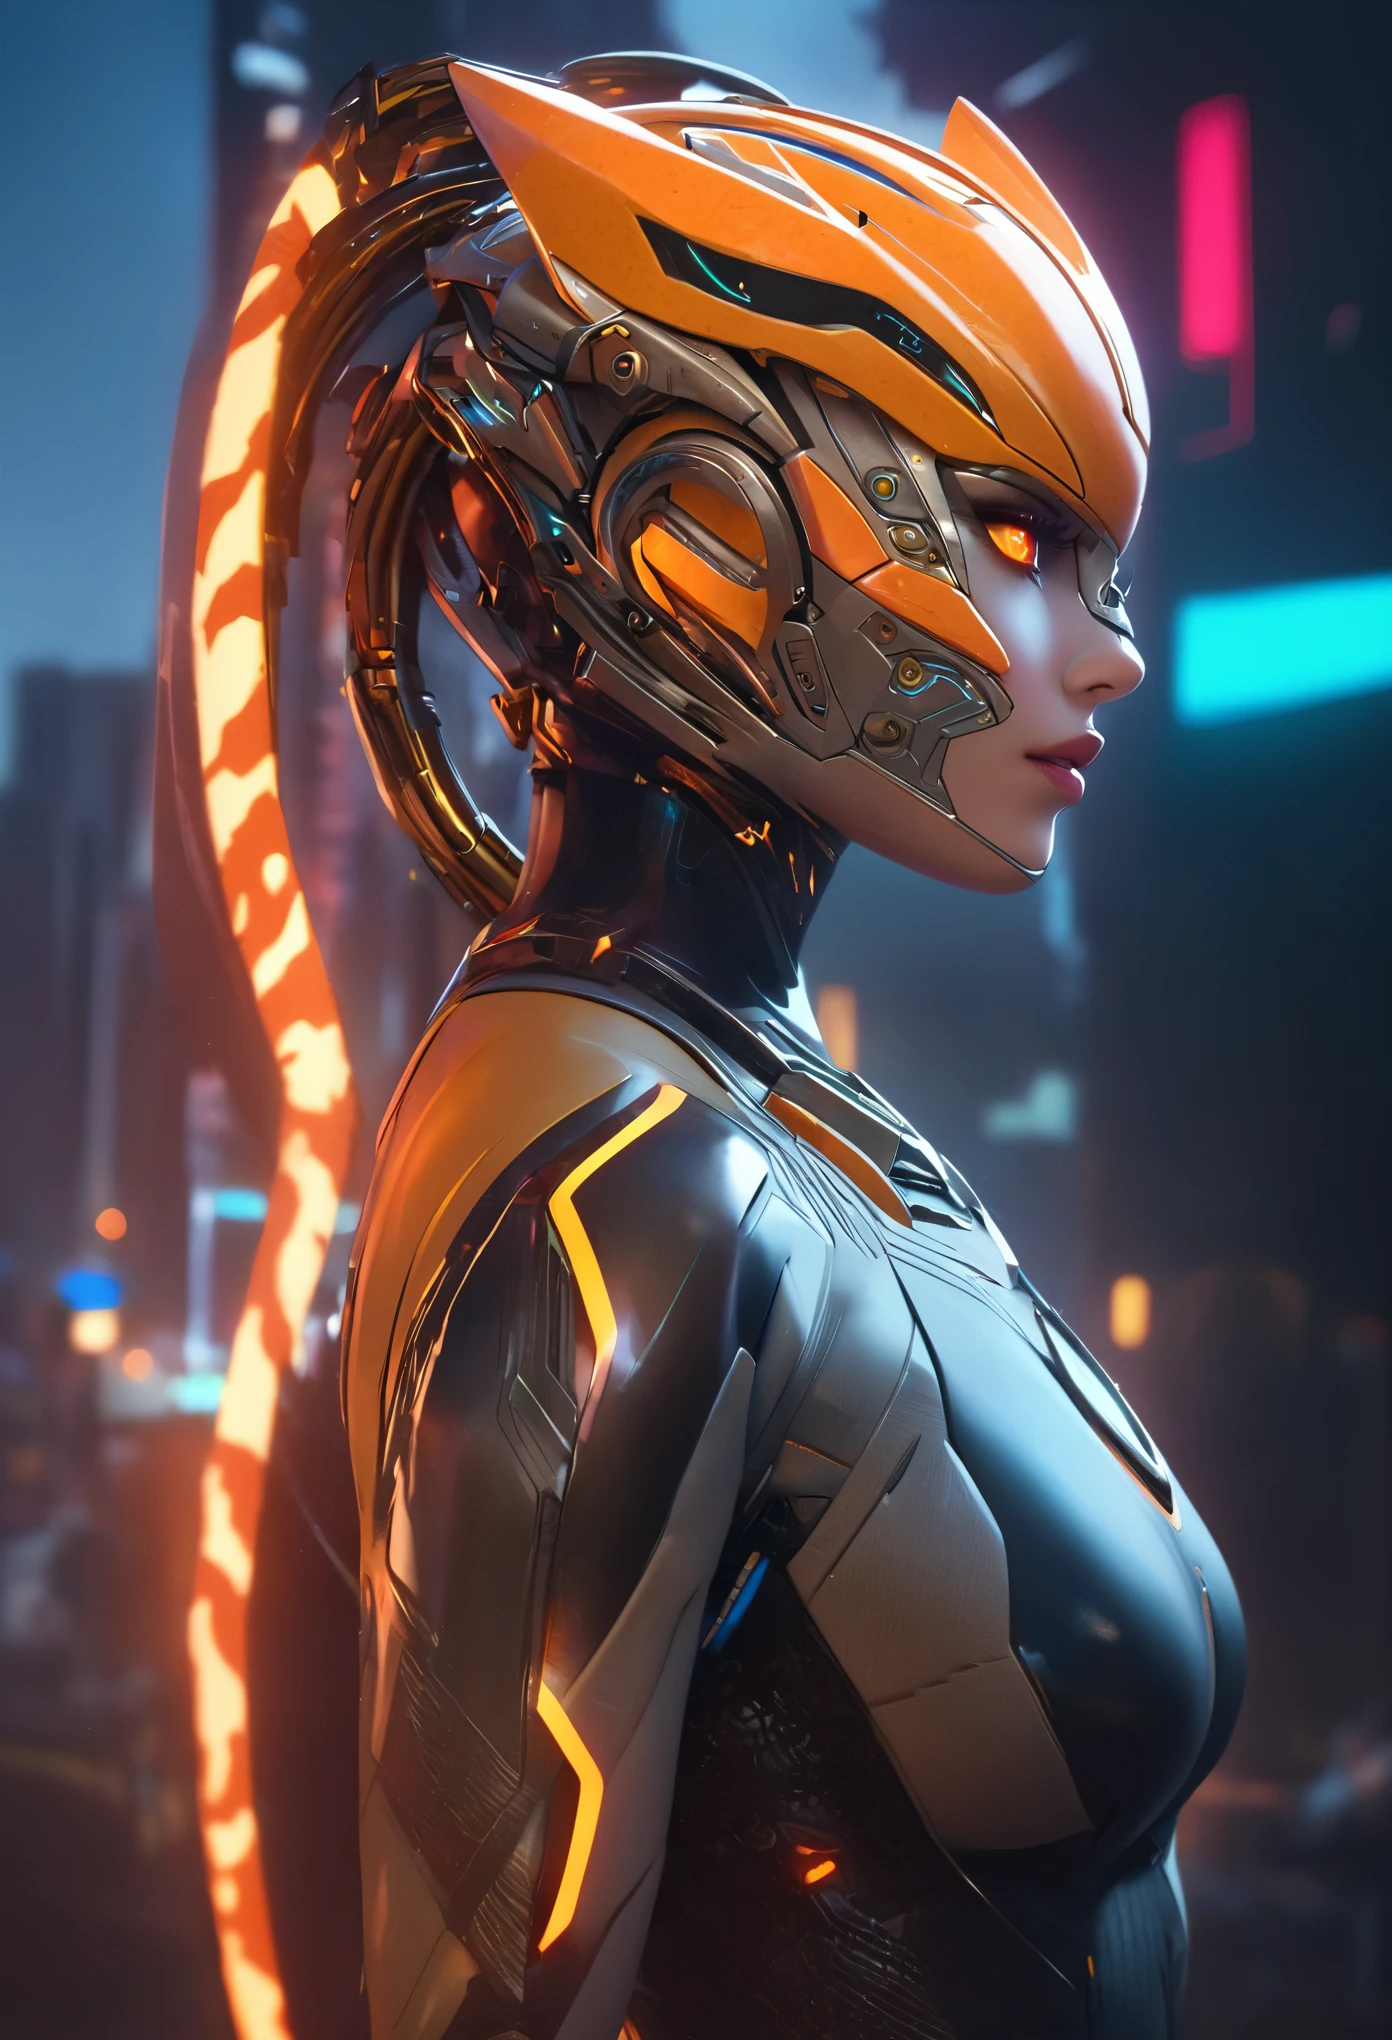 (best quality,4k,8k,highres,masterpiece:1.2),ultra-detailed,(realistic,photorealistic,photo-realistic:1.37),(from behind:1.5),1 android girl, beautiful detailed eyes, beautiful detailed lips, extremely detailed eyes and face, longeyelashes, metallic skin, mechanical body,sleek design,fierce expression,tiger-inspired features,striking orange and black stripes,glowing neon lights,wisps of exhaust smoke,urban sci-fi setting,gritty atmosphere,city skyline in background,high-tech gadgets and accessories,visually stunning,concept artists,impressive digital artwork,vivid colors,dynamic perspective,dramatic lighting,emitting ethereal glow,sharp focus,extraordinary details,highly detailed robotic limbs,sleek and polished surface,industrial style,enhanced strength and agility,androids resembling wild animals,mixture of beauty and power,exuding a sense of mystery,intense and captivating scene,blurring the boundaries between machine and nature, (glowing tiger eyes:1.5)